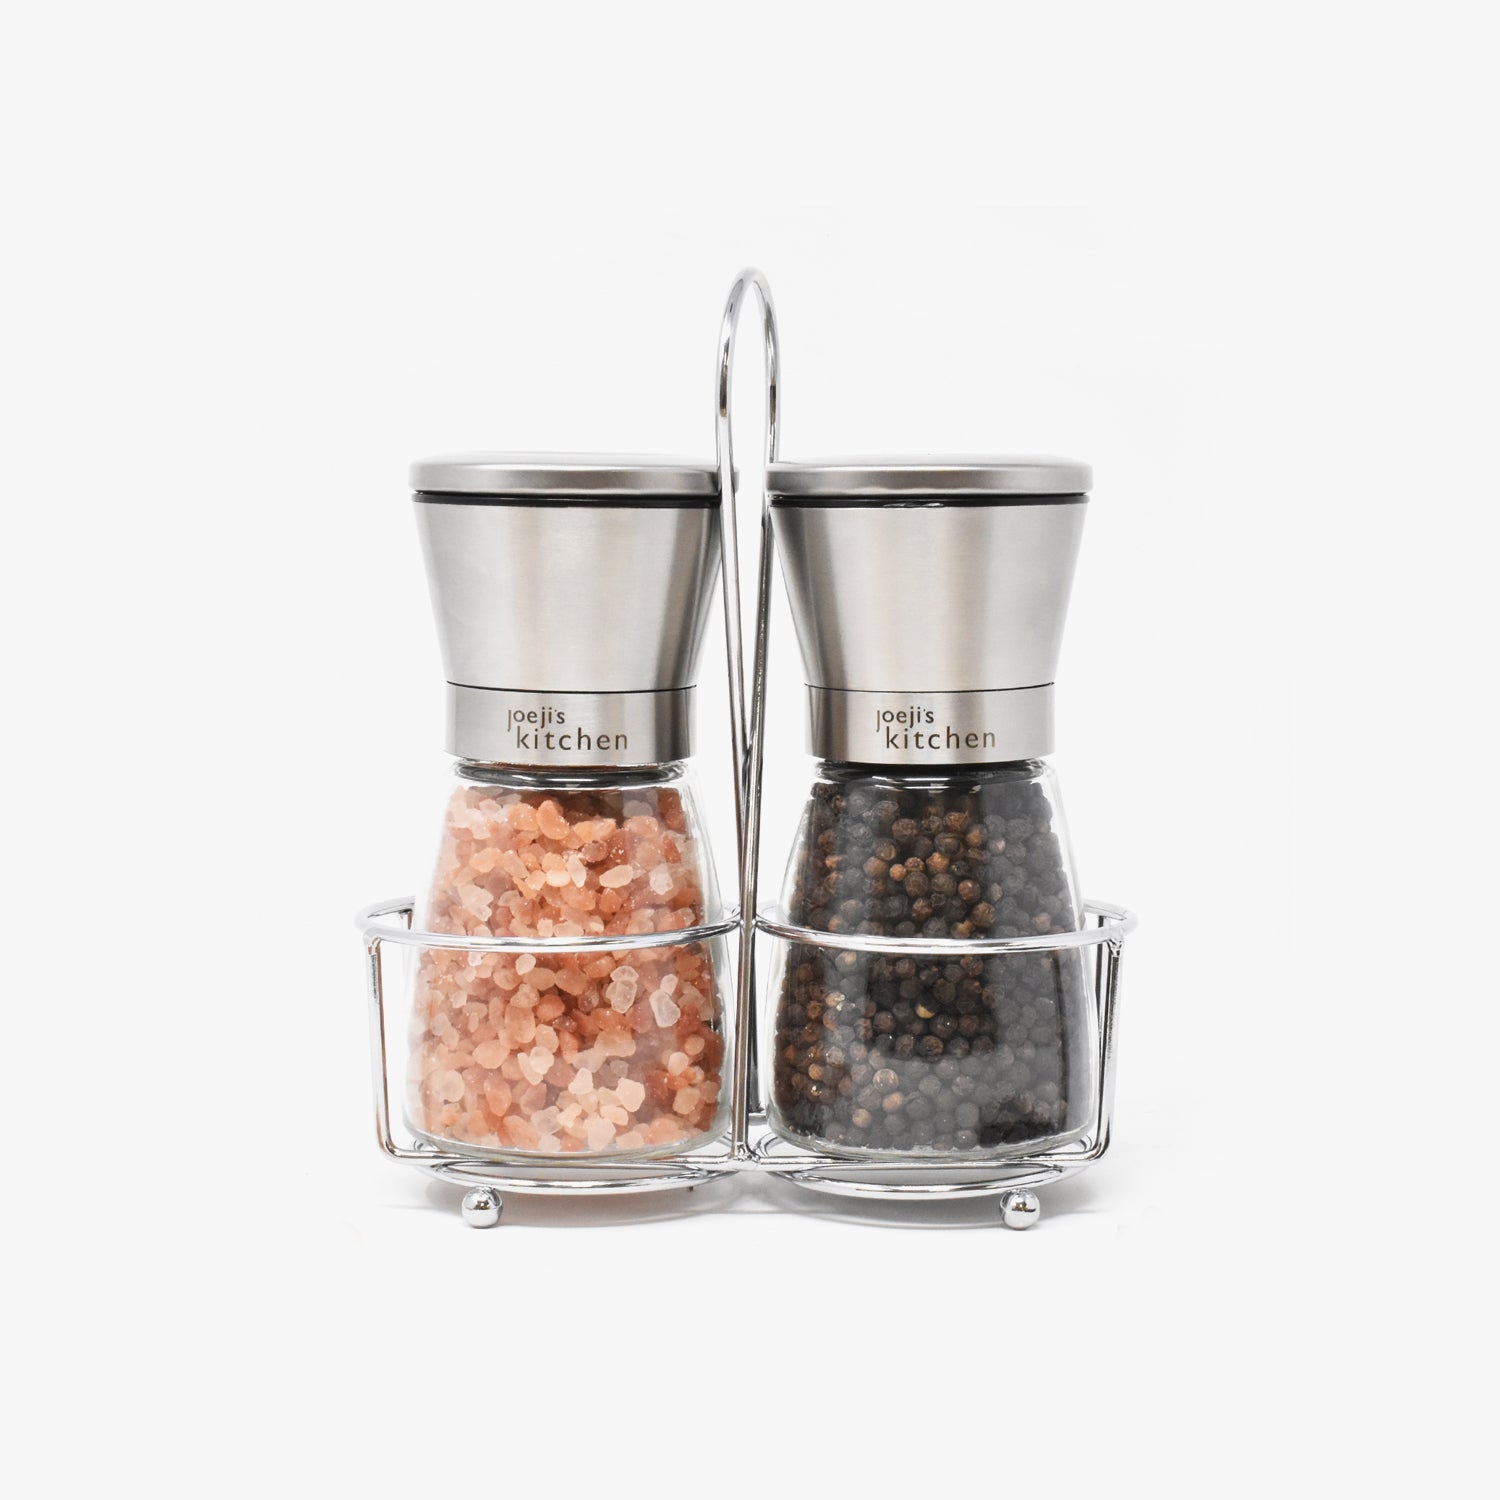 Gravity controlled Automatic seasoning dispenser – LazyPotOfNoodles